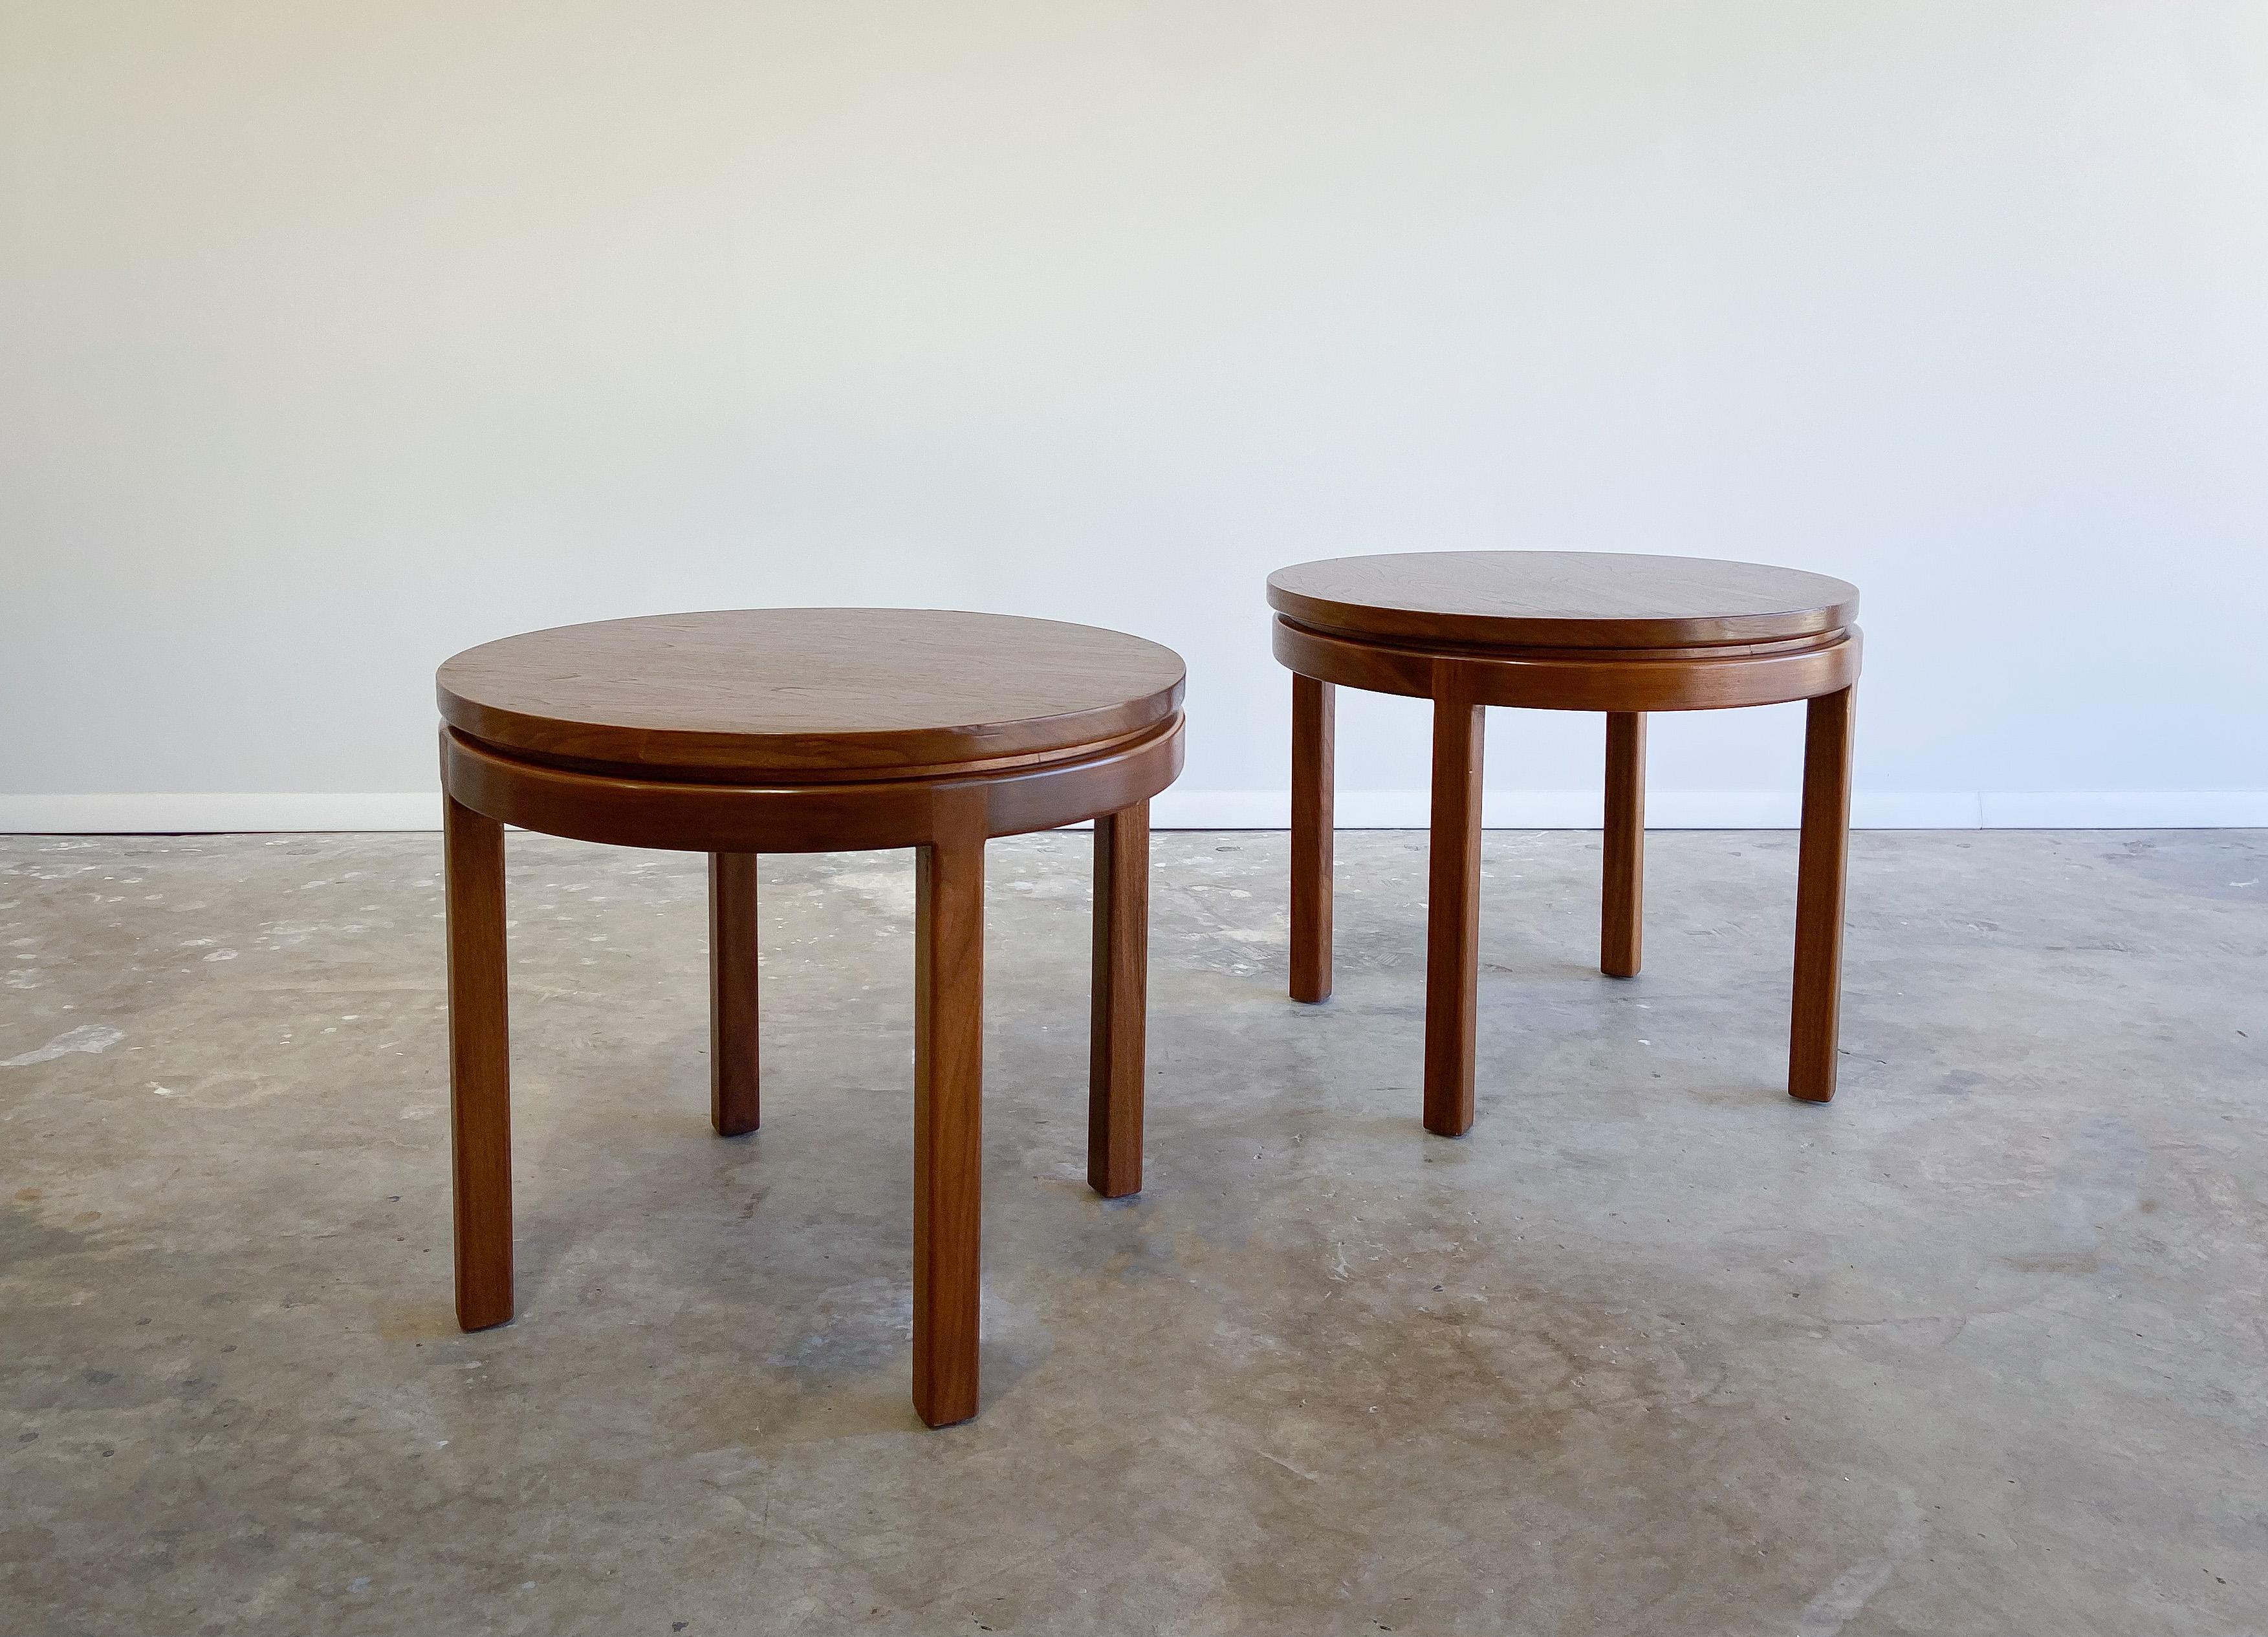 Offered is a well made pair of walnut tables that would function well either as side or end tables. Very much in the manner of Edward Wormley for Dunbar with similar build quality and details. 

Both tables are solid and sturdy with some minor